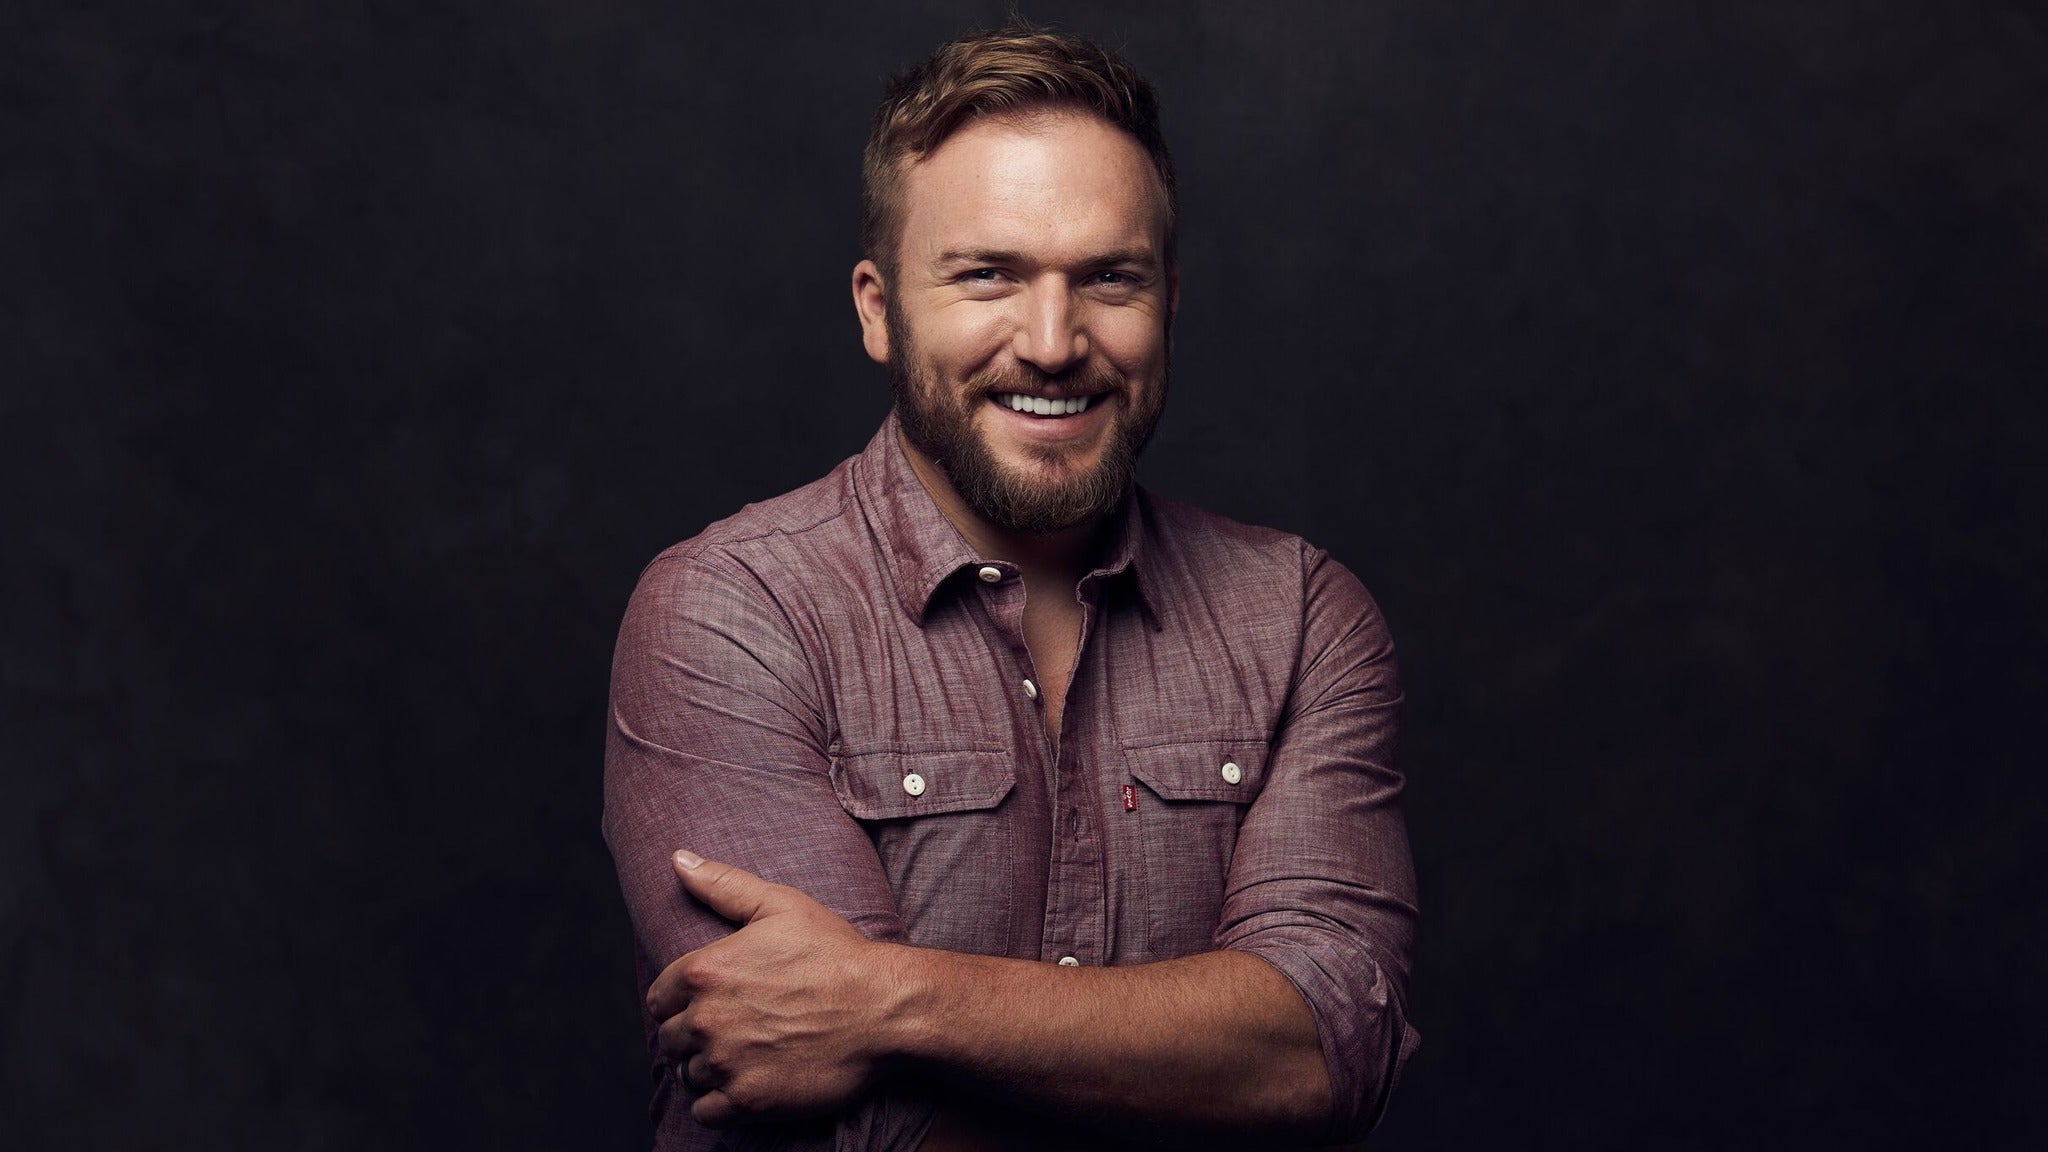 Image used with permission from Ticketmaster | Logan Mize tickets